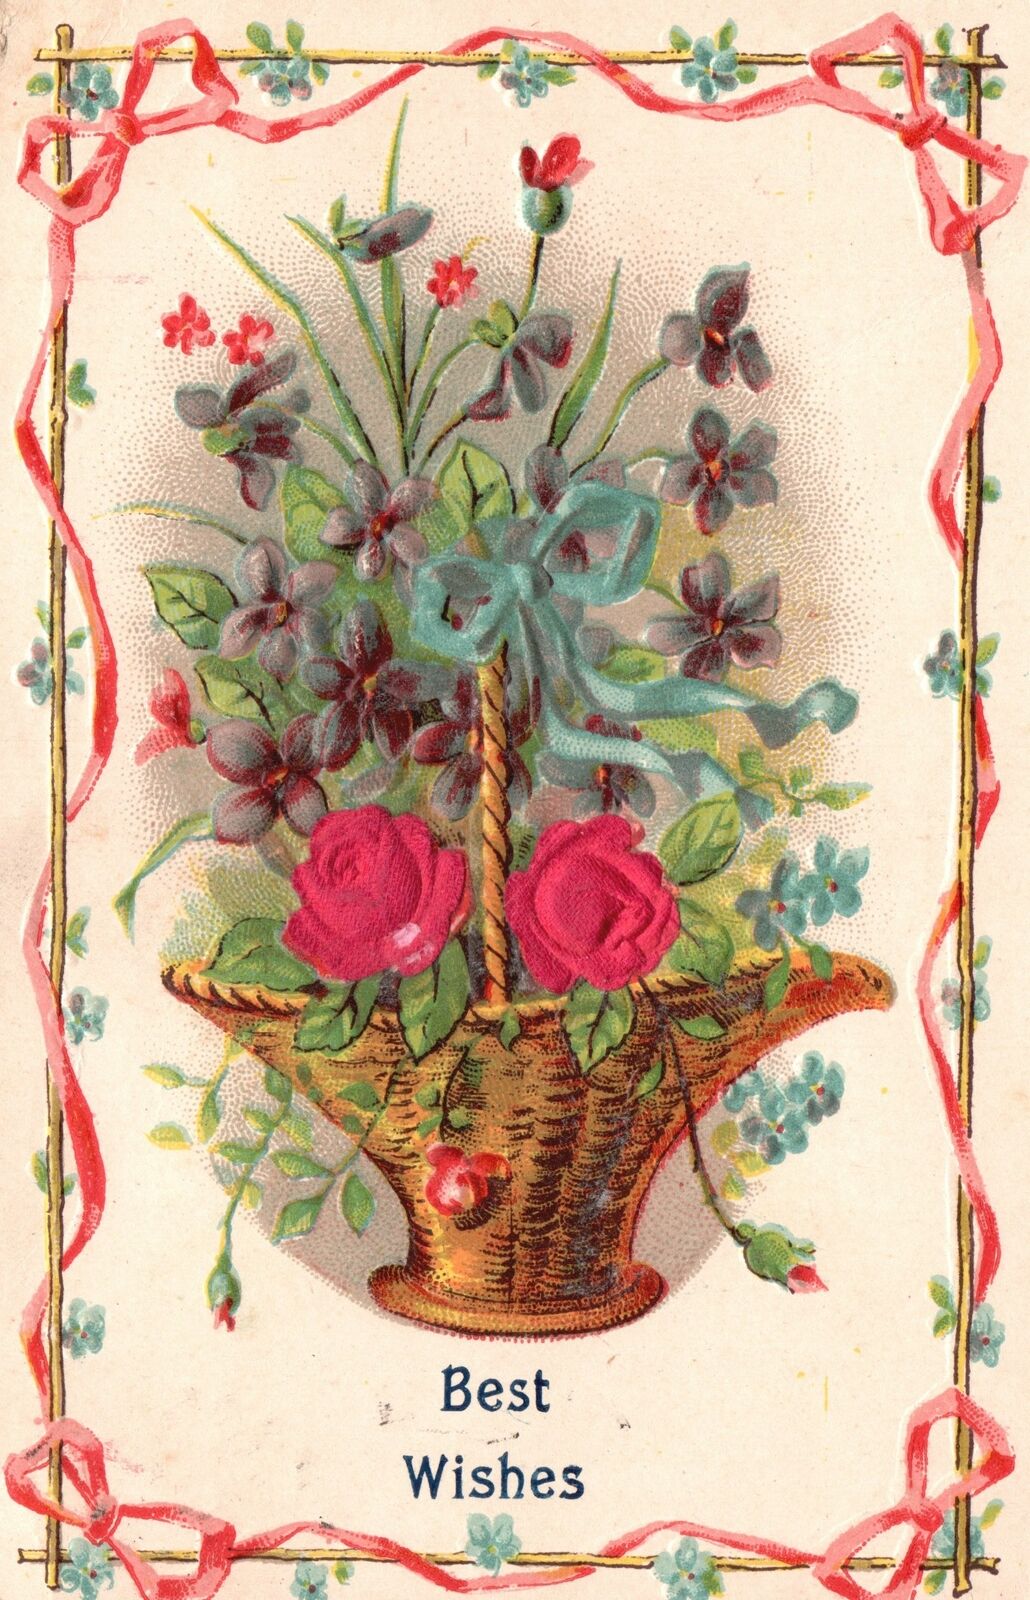 Vintage Postcard 1910's Best Wishes Greetings Card Special Day Celebration